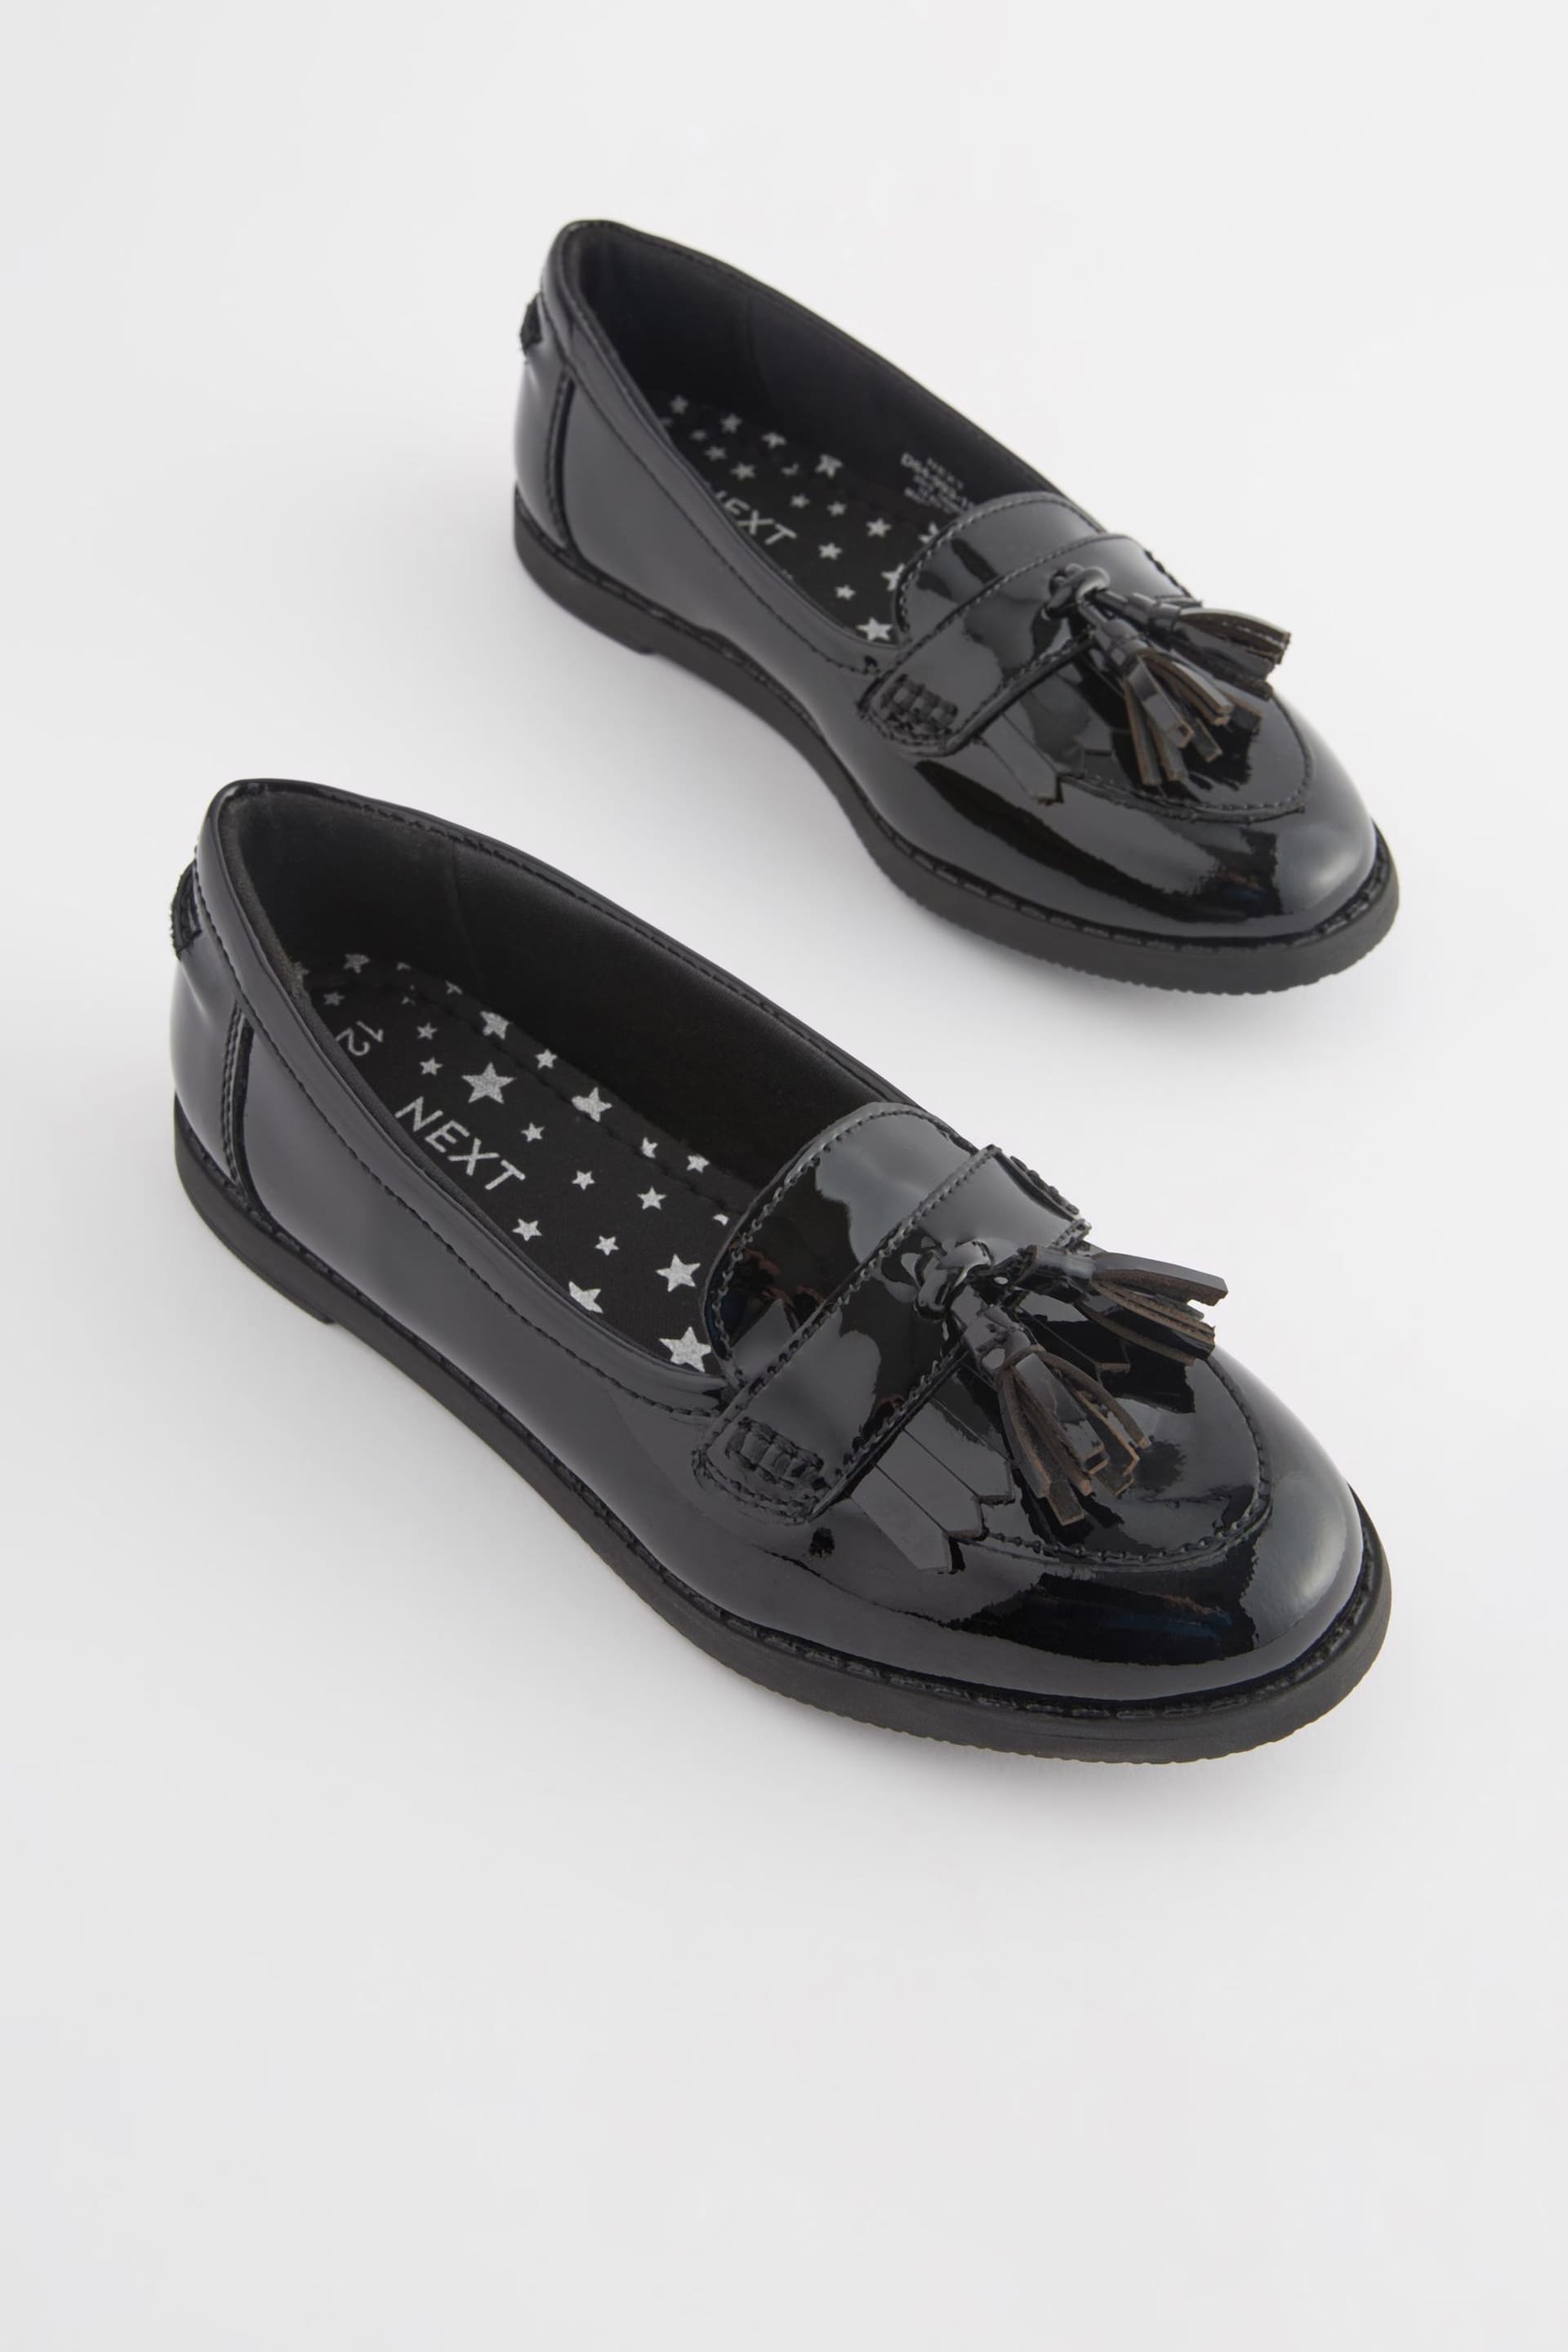 Black Patent Narrow Fit (E) School Leather Tassel Loafers - Image 1 of 5